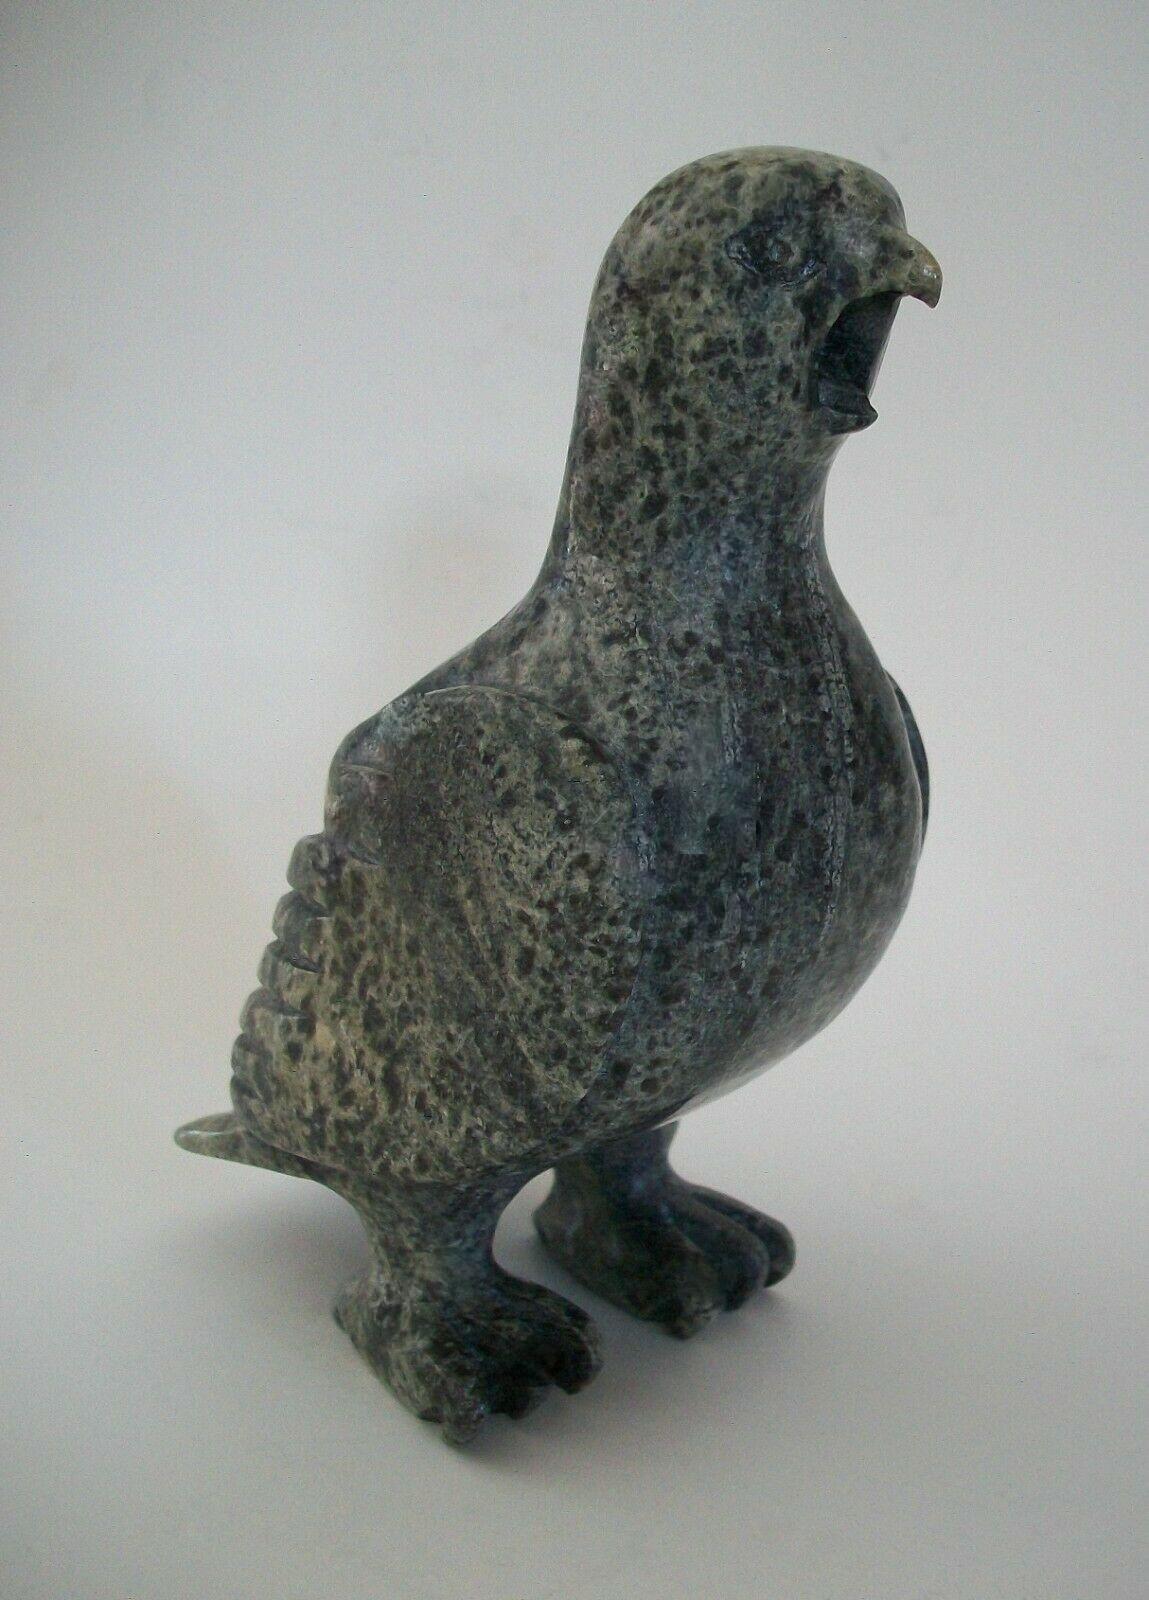 Vintage Cape Dorset Inuit stone carving of a screeching Ptarmigan - fine sculpture with articulated feathers and feet - signed TR (in Roman - unknown / unidentified artist) on the base - Canada - circa 1960's.

Excellent état vintage - légères